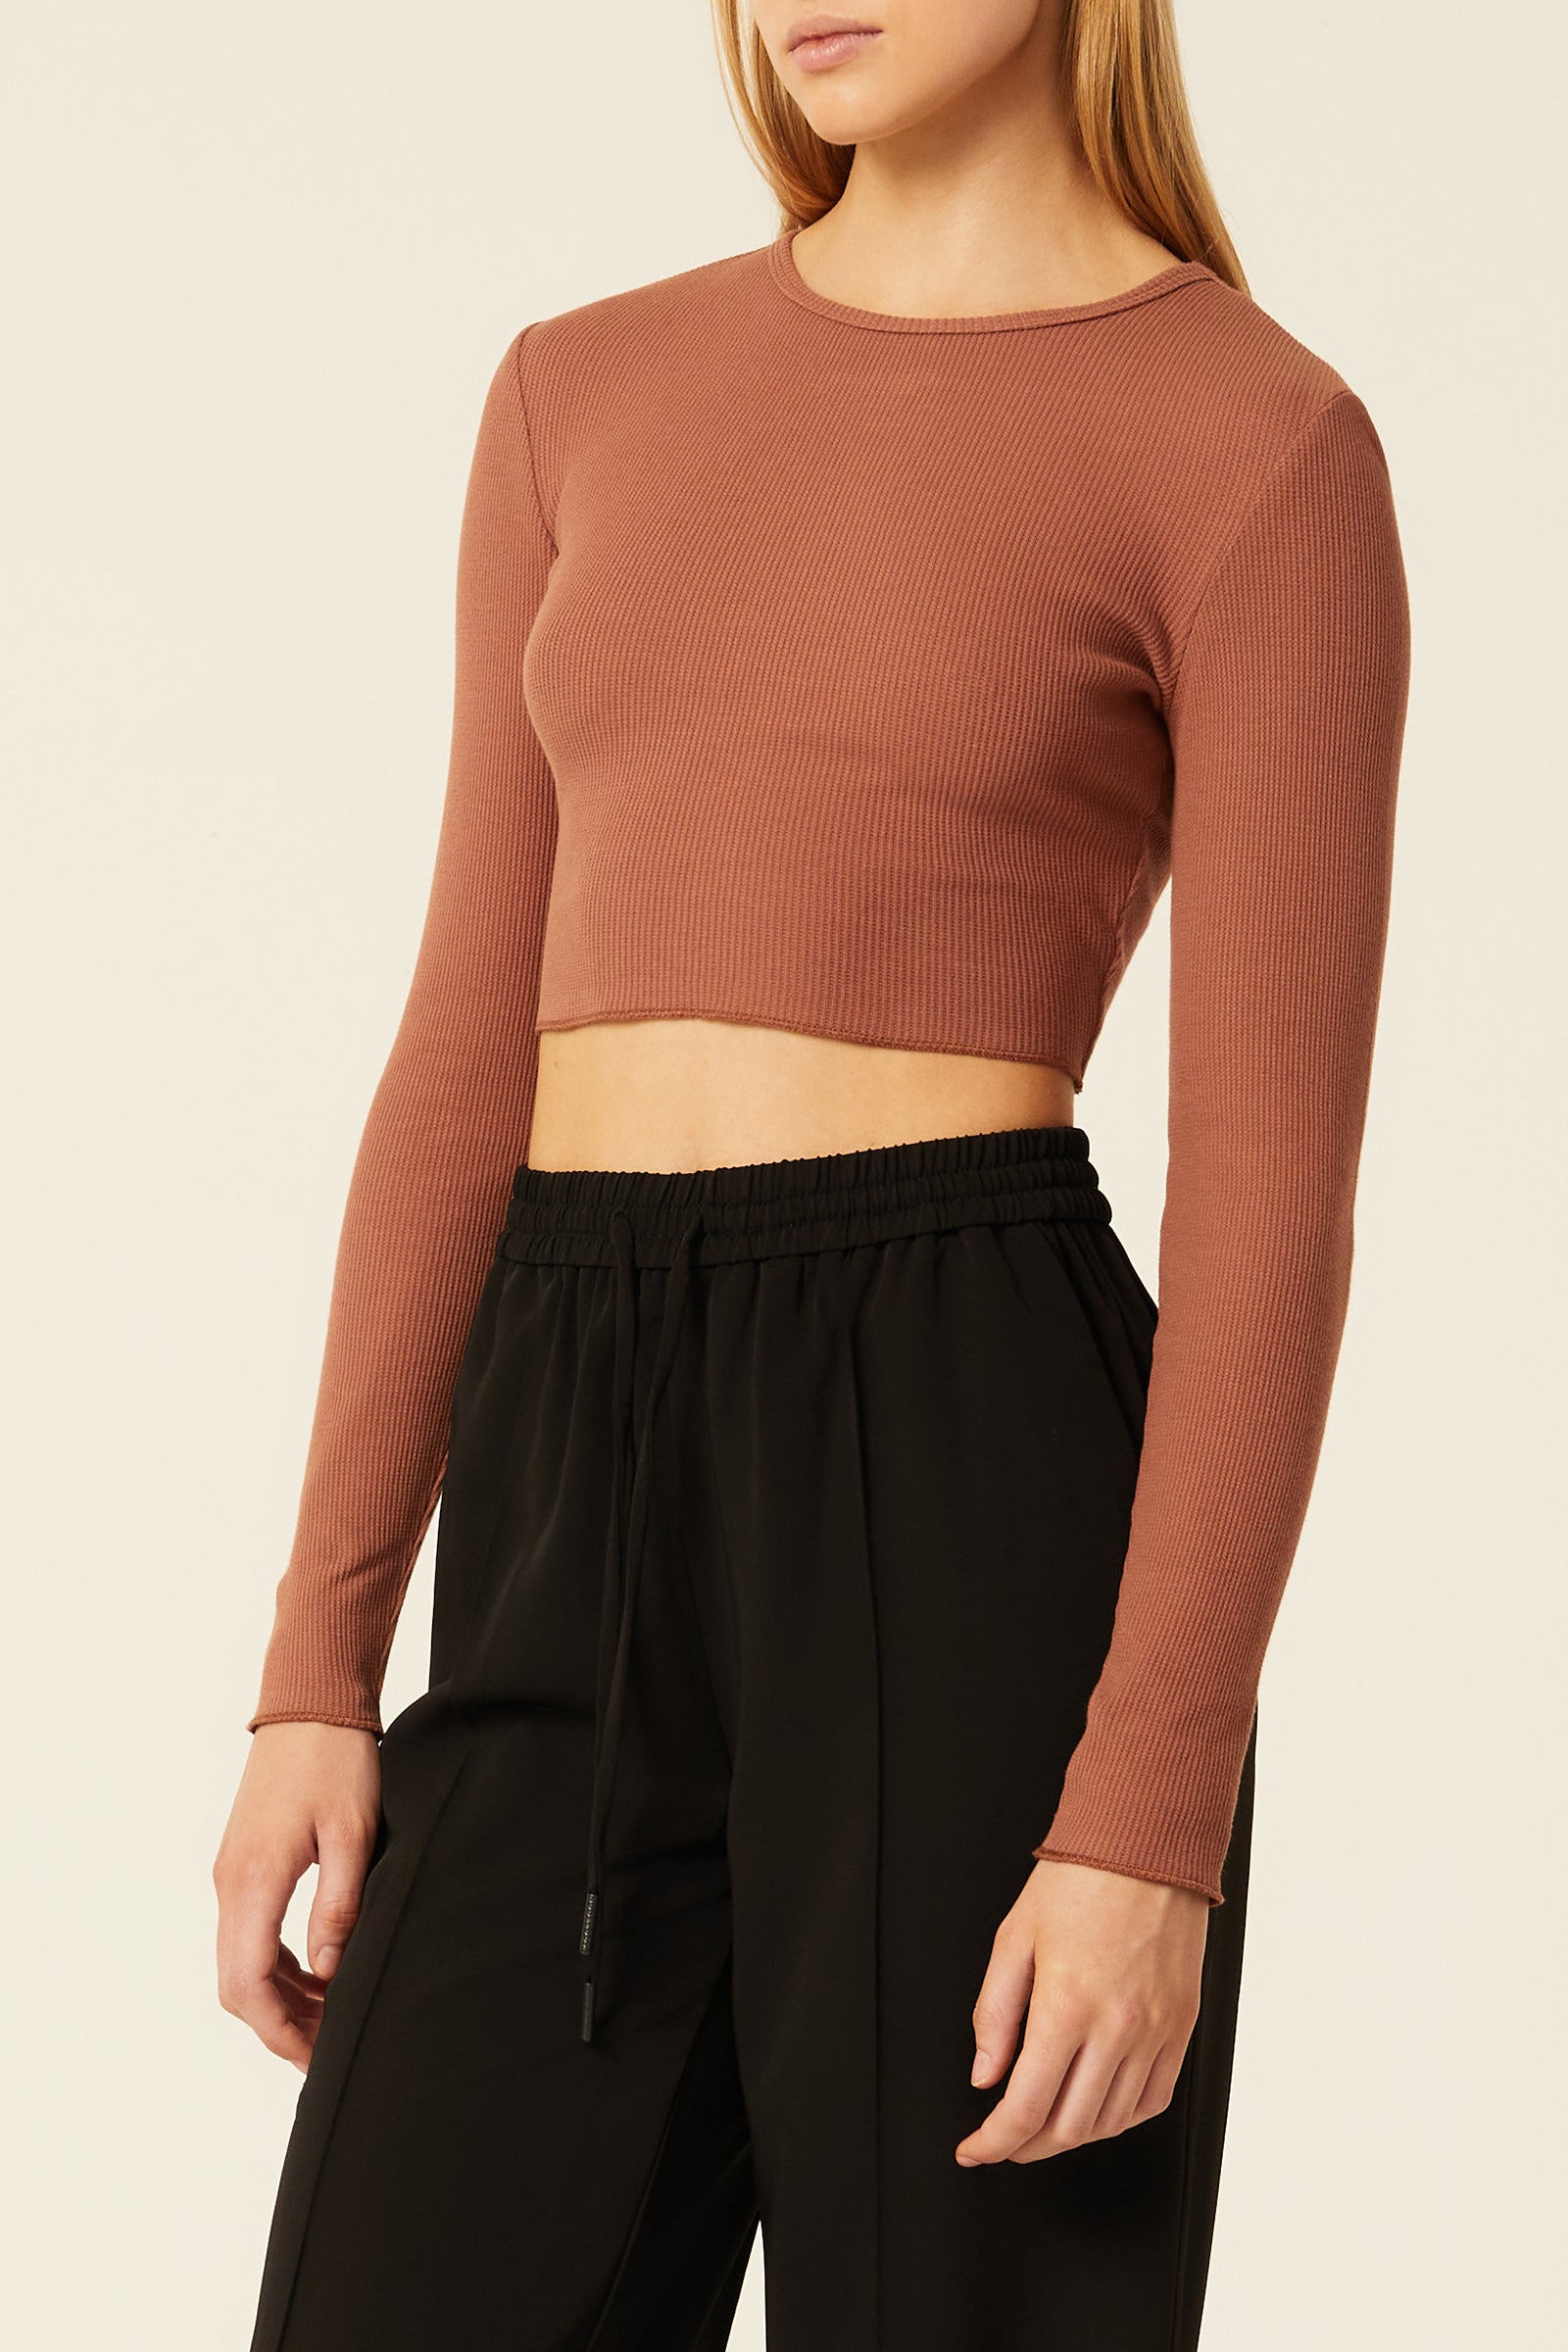 Nude Lucy Cameron Waffle Long Sleeve Tee In A Light Brown Brandy Colour 